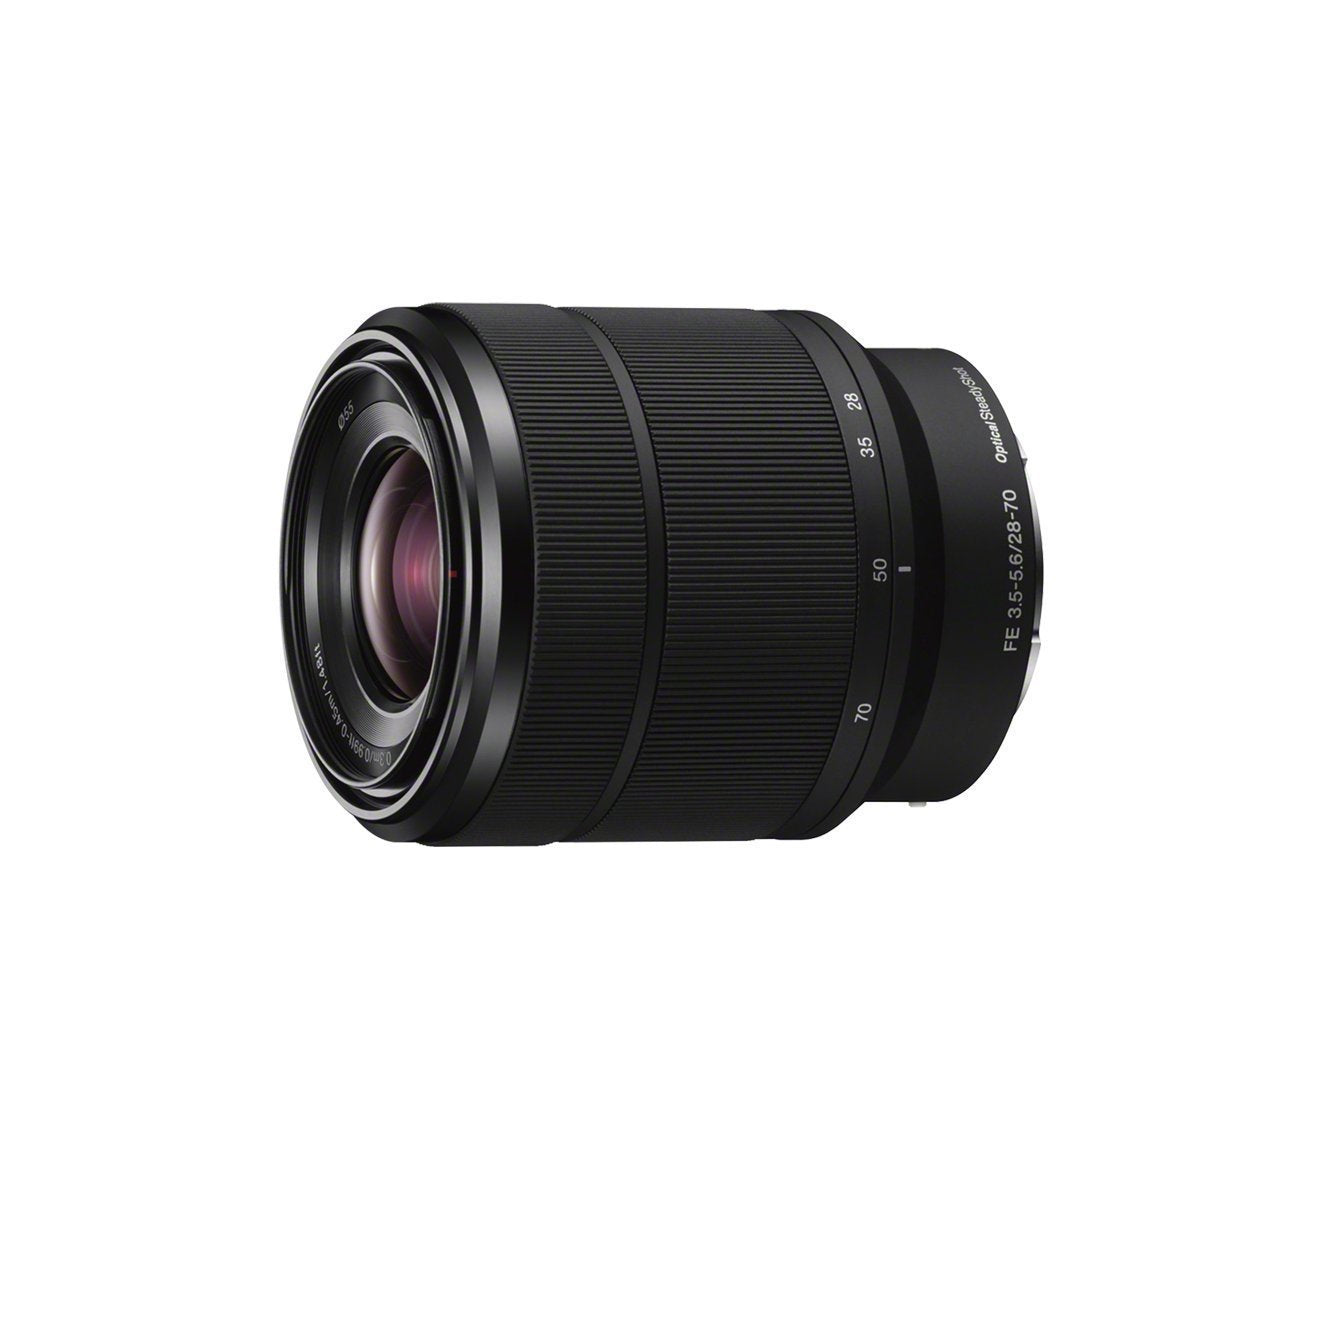 Sony - 28 mm to 70 mm - f/3.5 - 5.6 - Zoom Lens for Sony E - Designed for Camera - 55 mm Attachment - 0.19x Magnification - 2.5x Optical Zoom - Optical IS - 2.9Diameter -